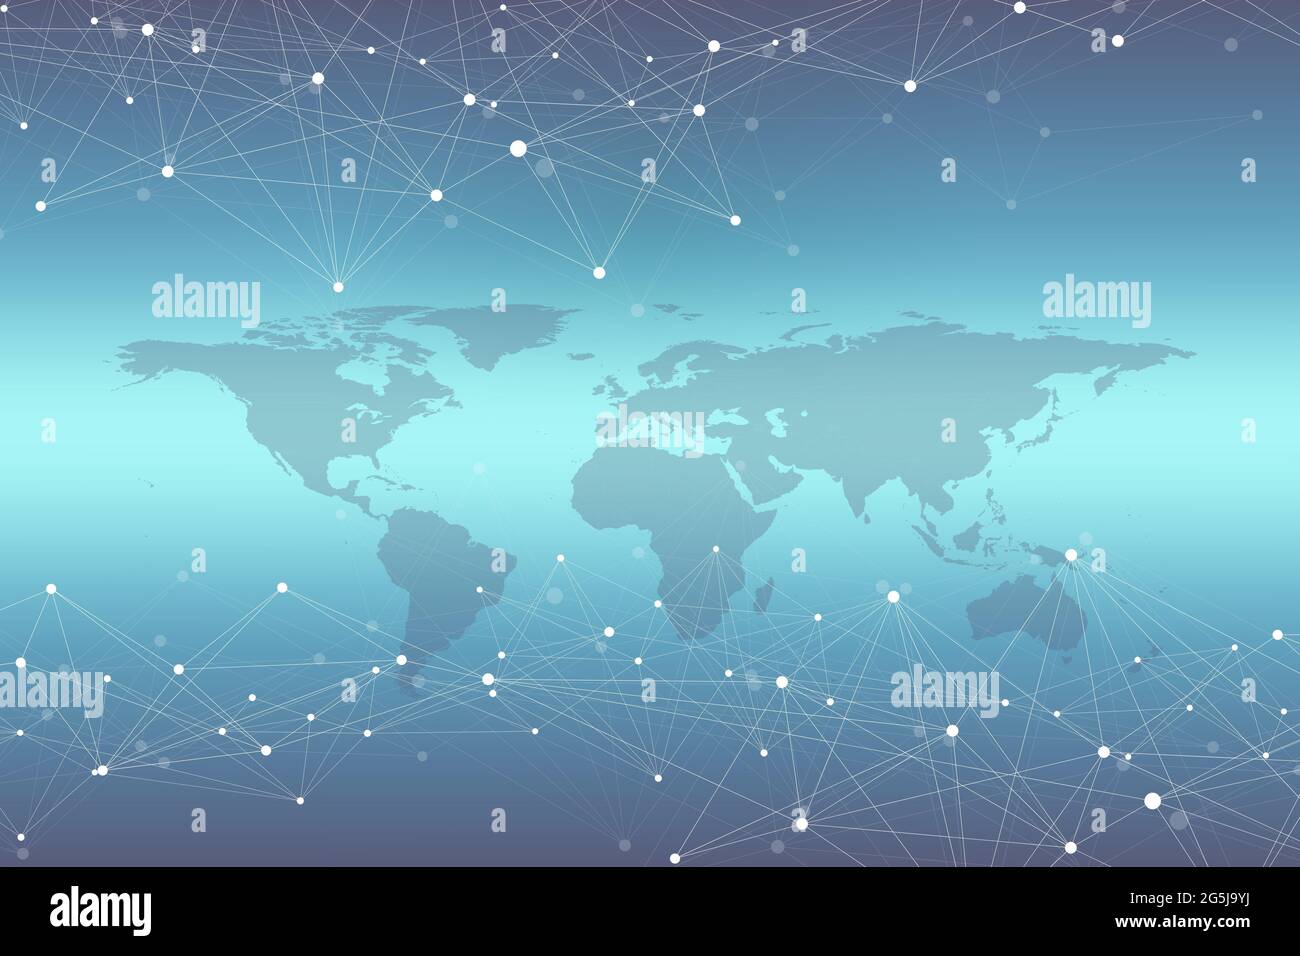 World map with global technology networking concept. Digital data visualization. Lines plexus. Big Data background communication. Scientific Stock Photo